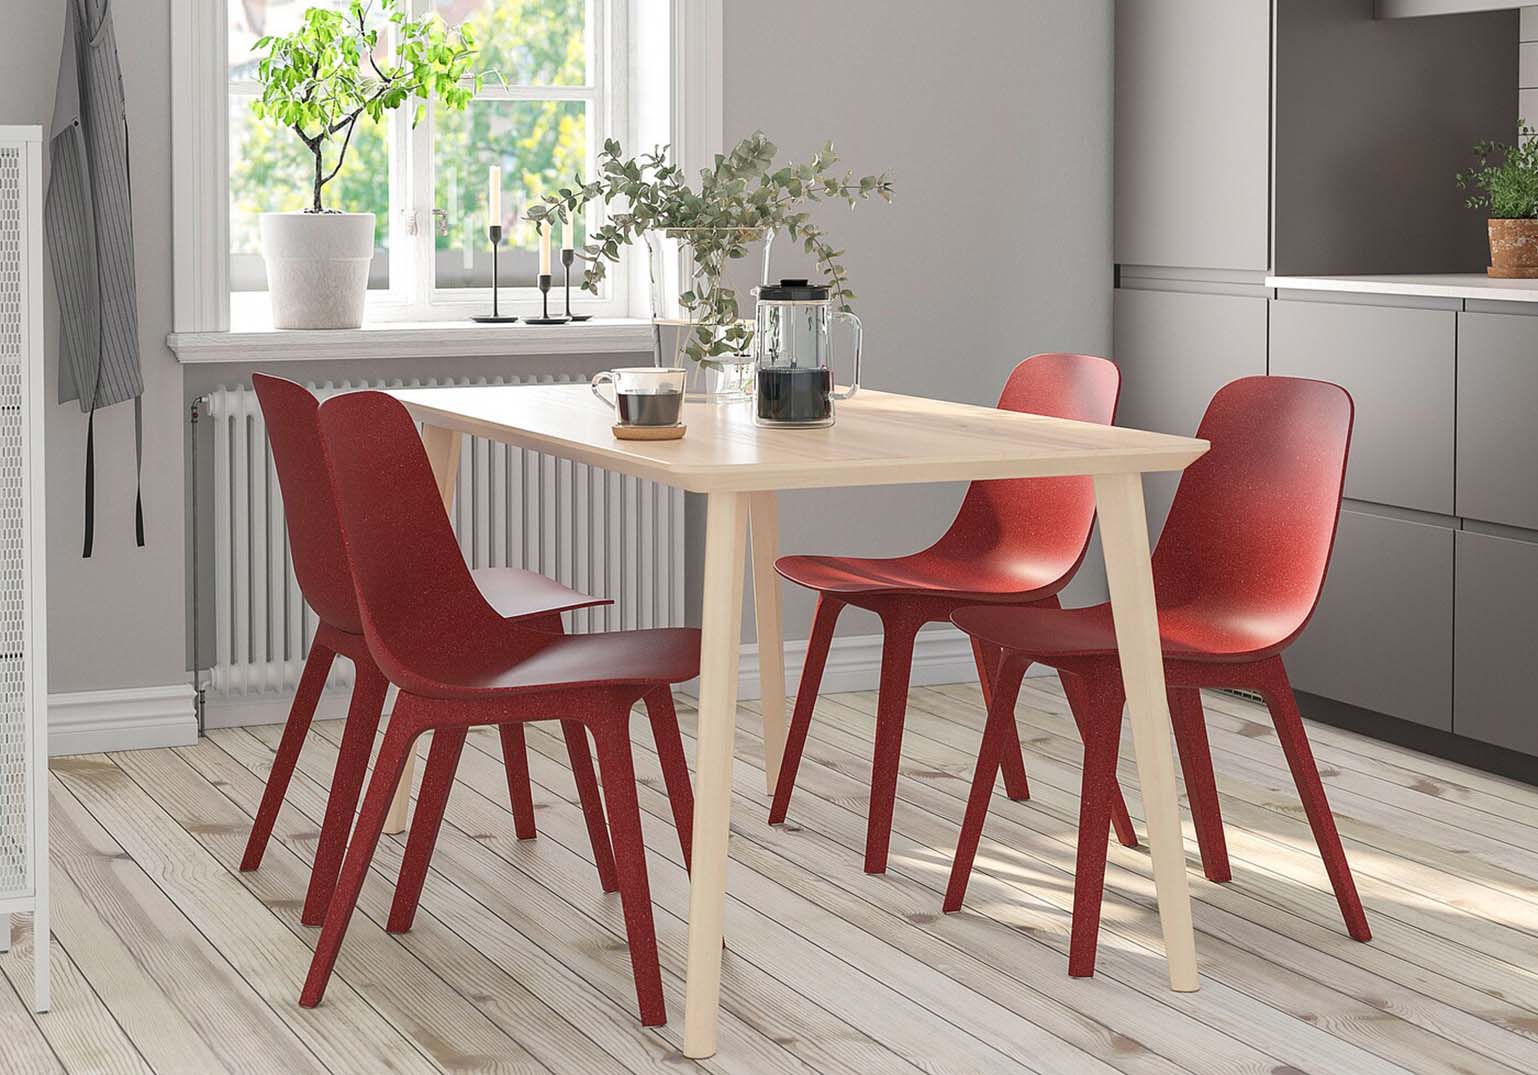 Dining Delight: Exploring Exceptional Table and Chair Ensembles